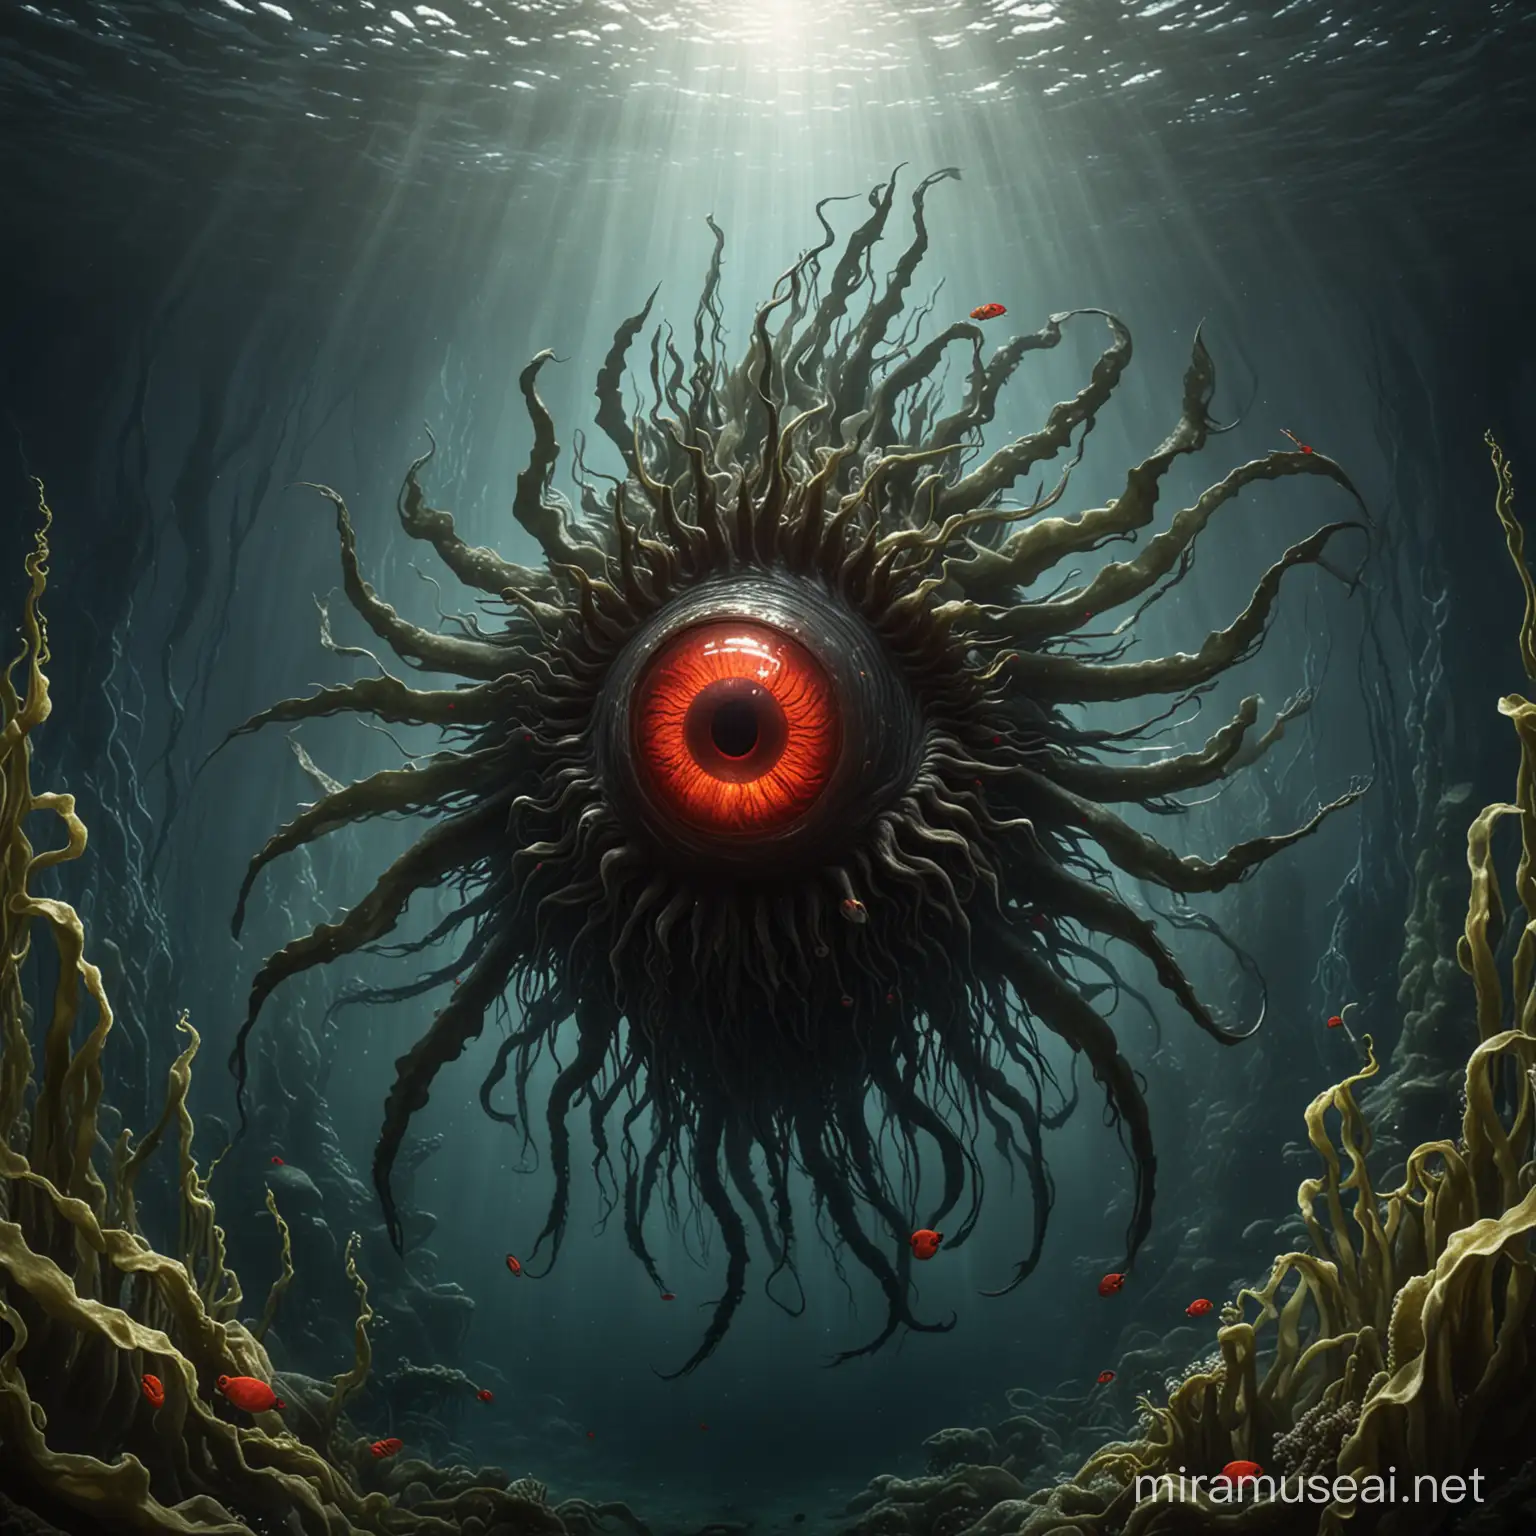 A kelp based sea monster with one giant red eye in it's center.